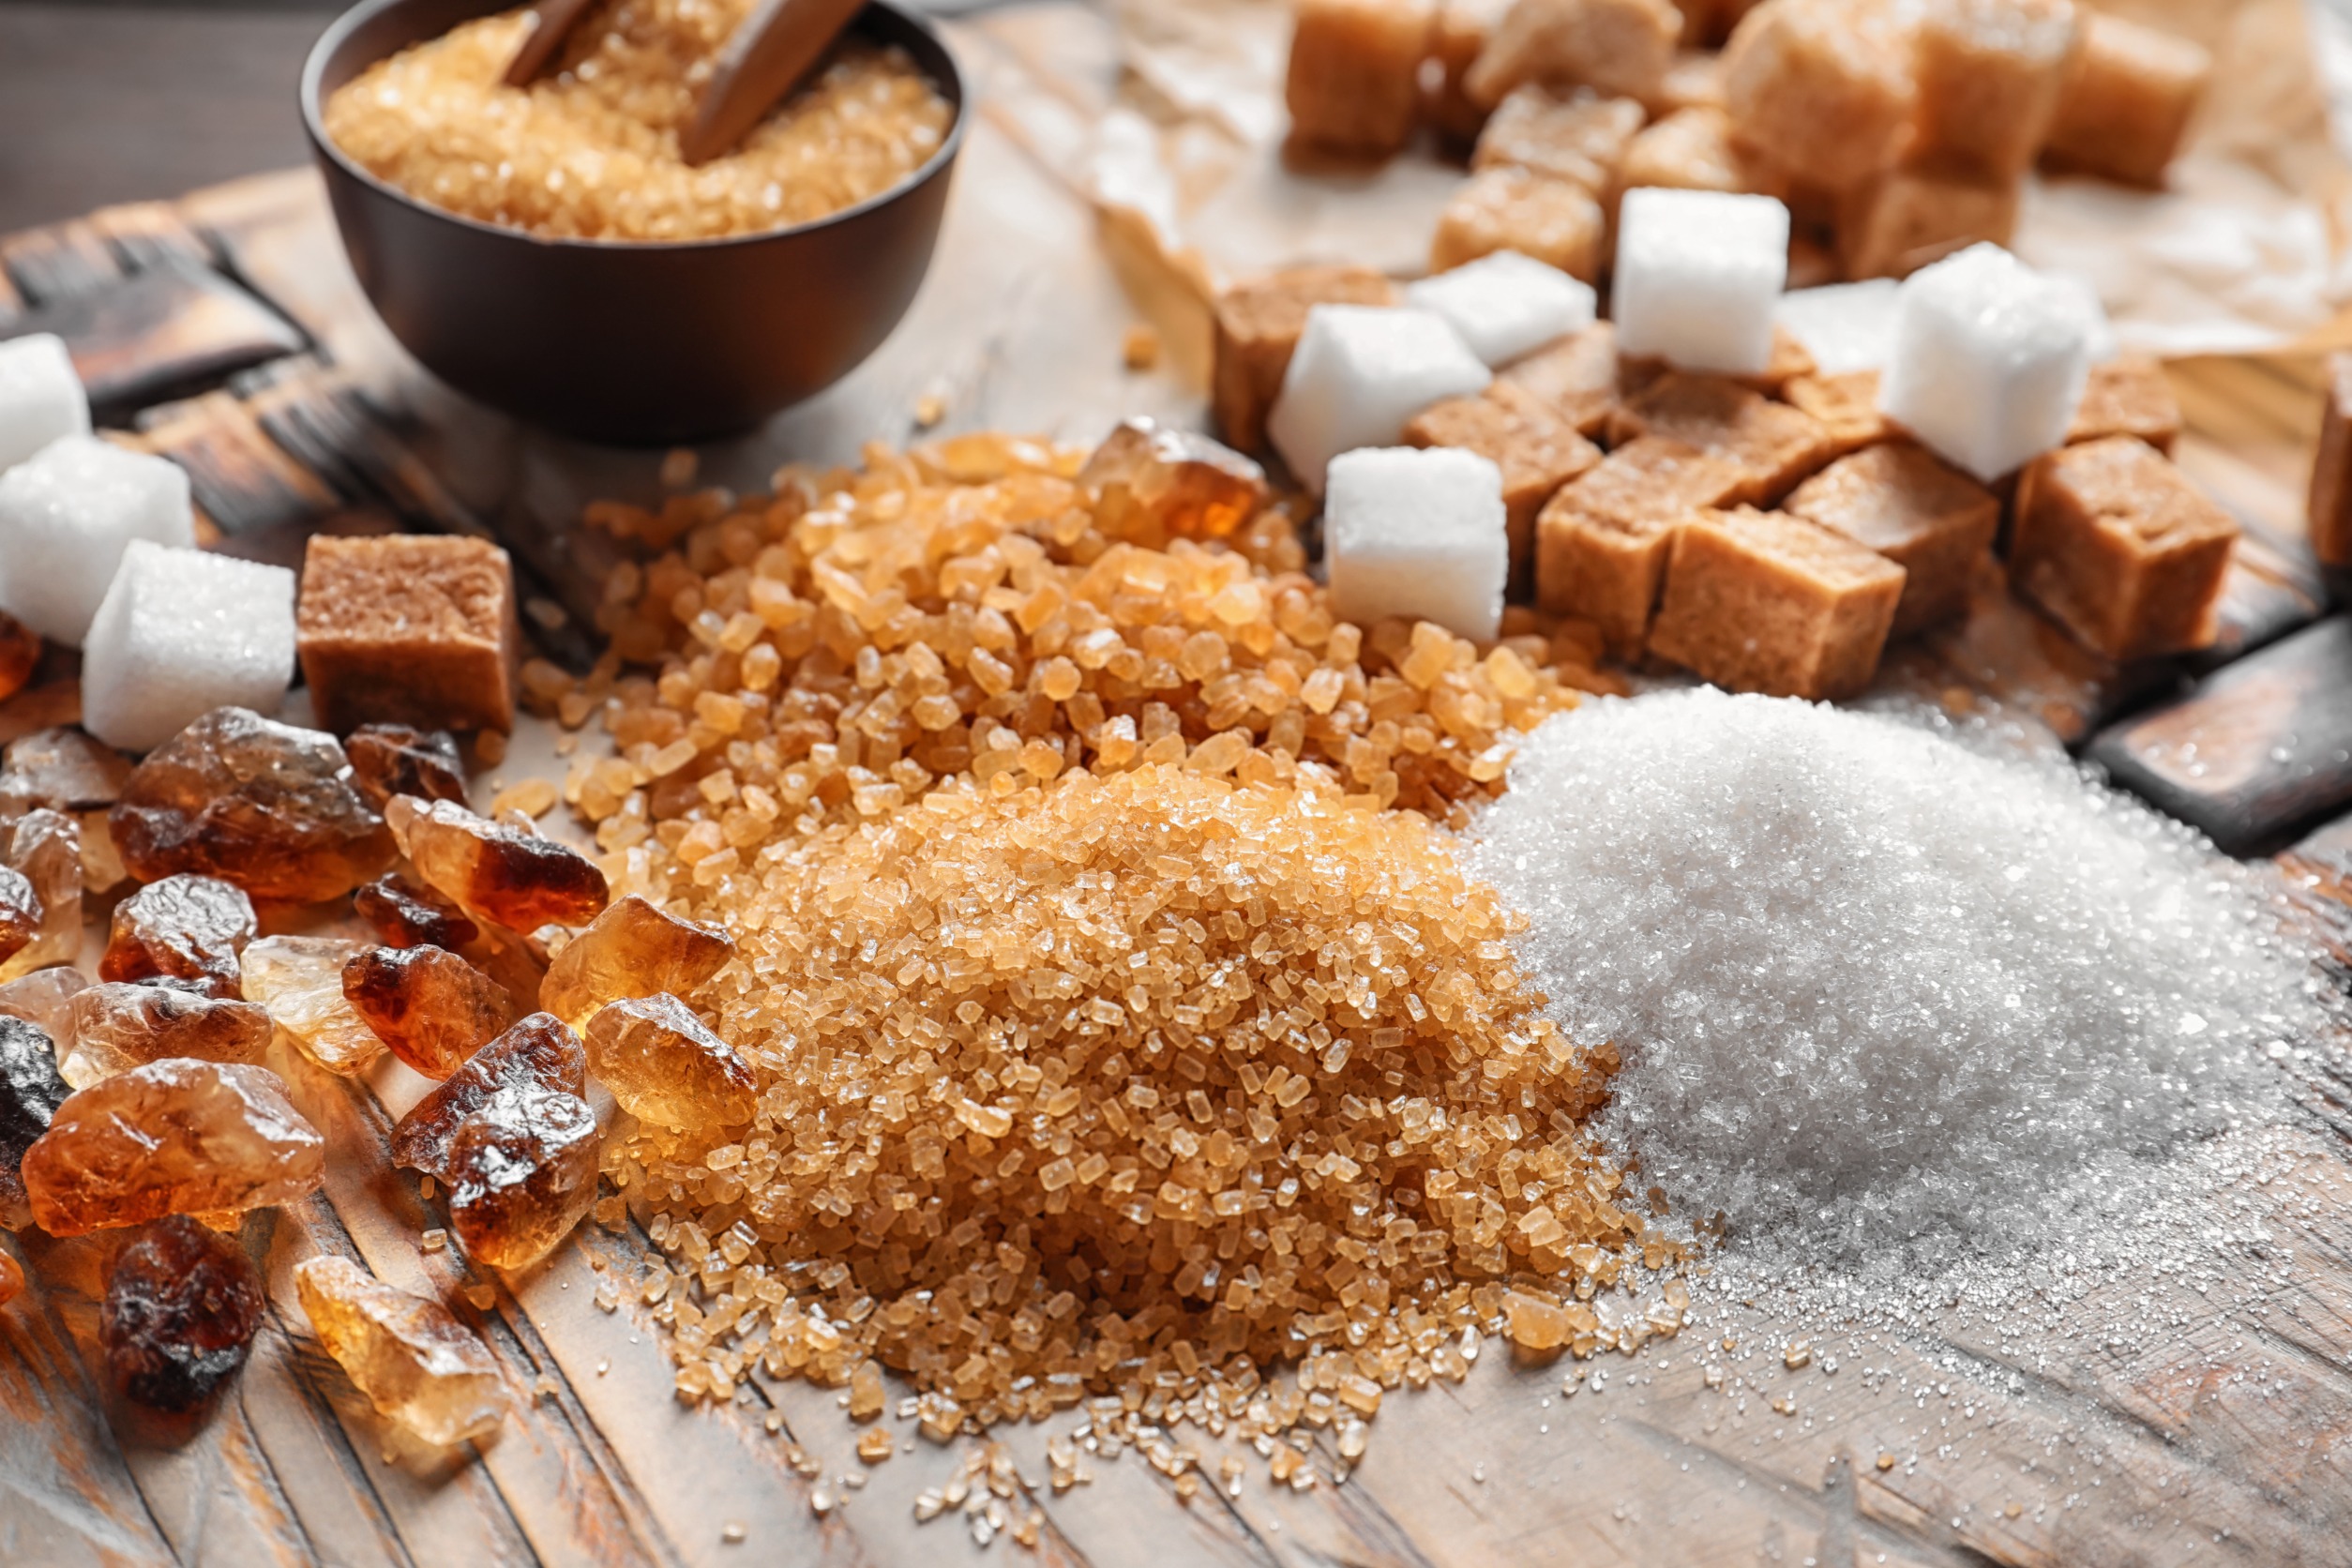 Different types of organic sugars and sweeteners from a frozen food ingredient supplier